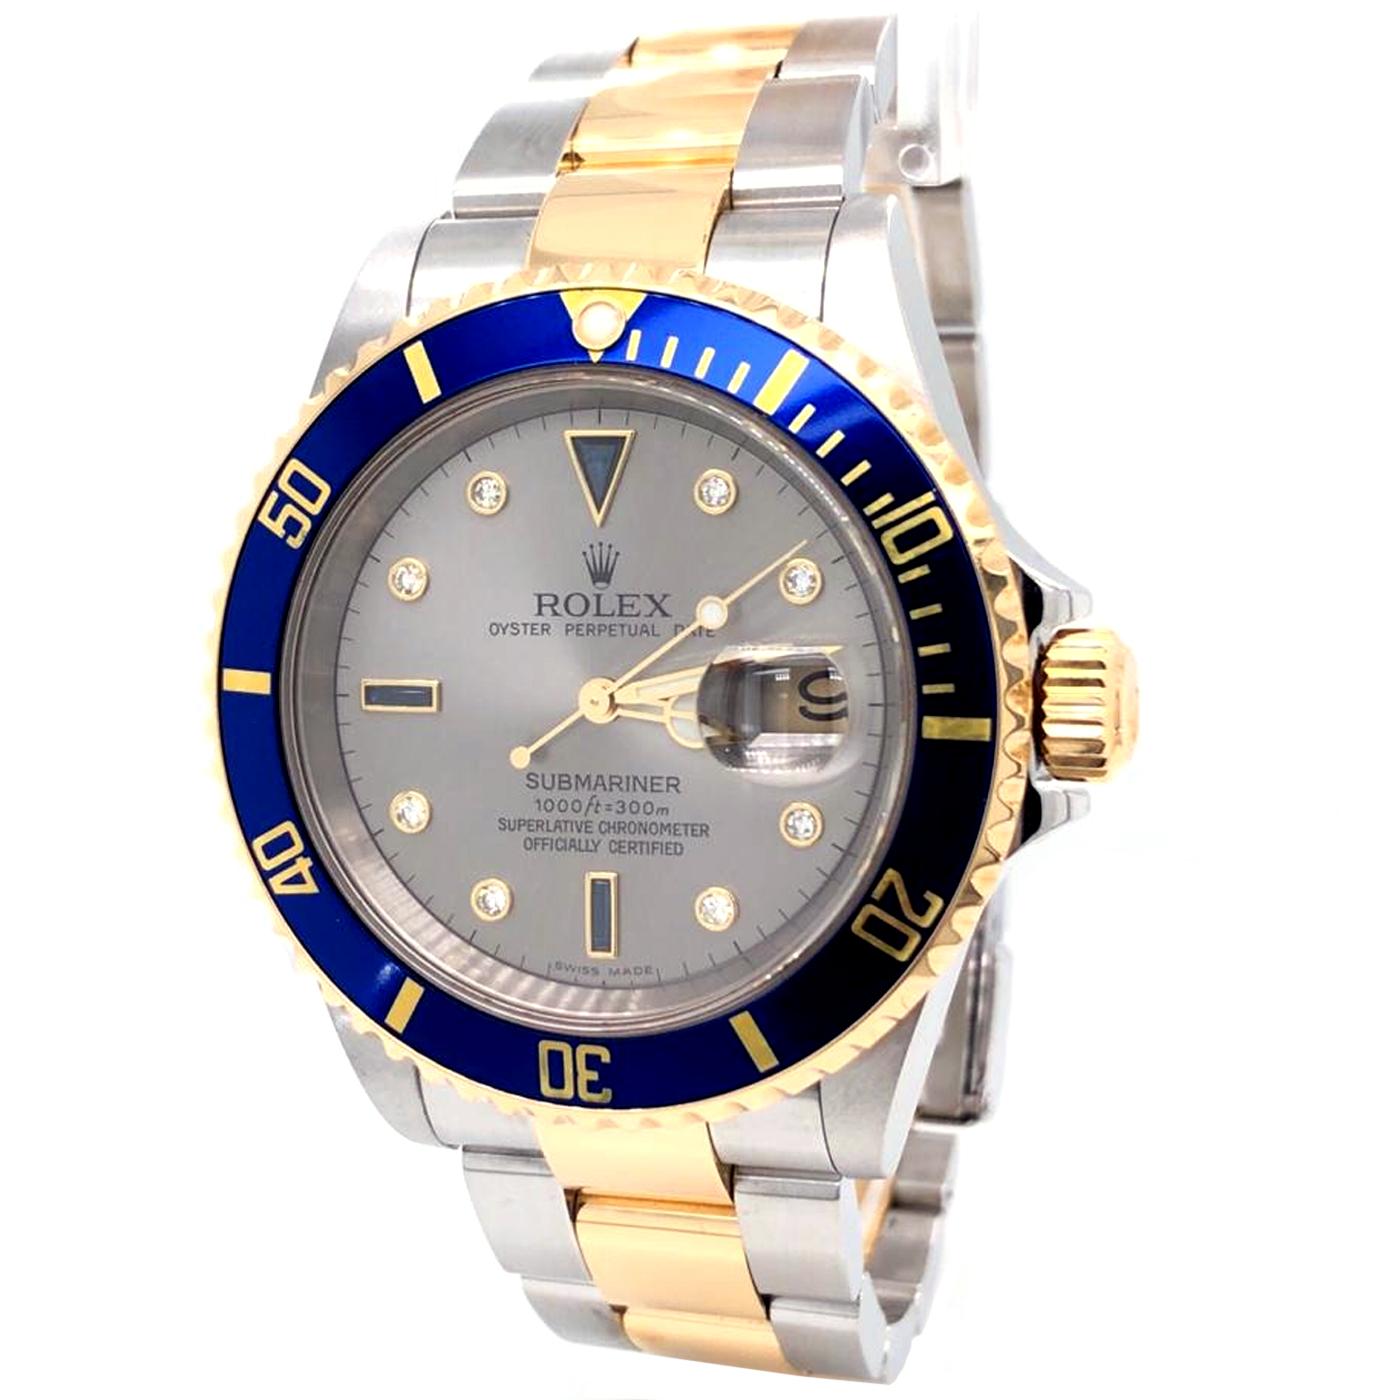 Rolex Submariner Steel Gold Slate Diamond Sapphire Serti Men's Watch 16613. Officially certified chronometer automatic self-winding movement. Stainless steel and 18k yellow gold case 40 mm in diameter. Rolex logo on a crown. Blue insert special